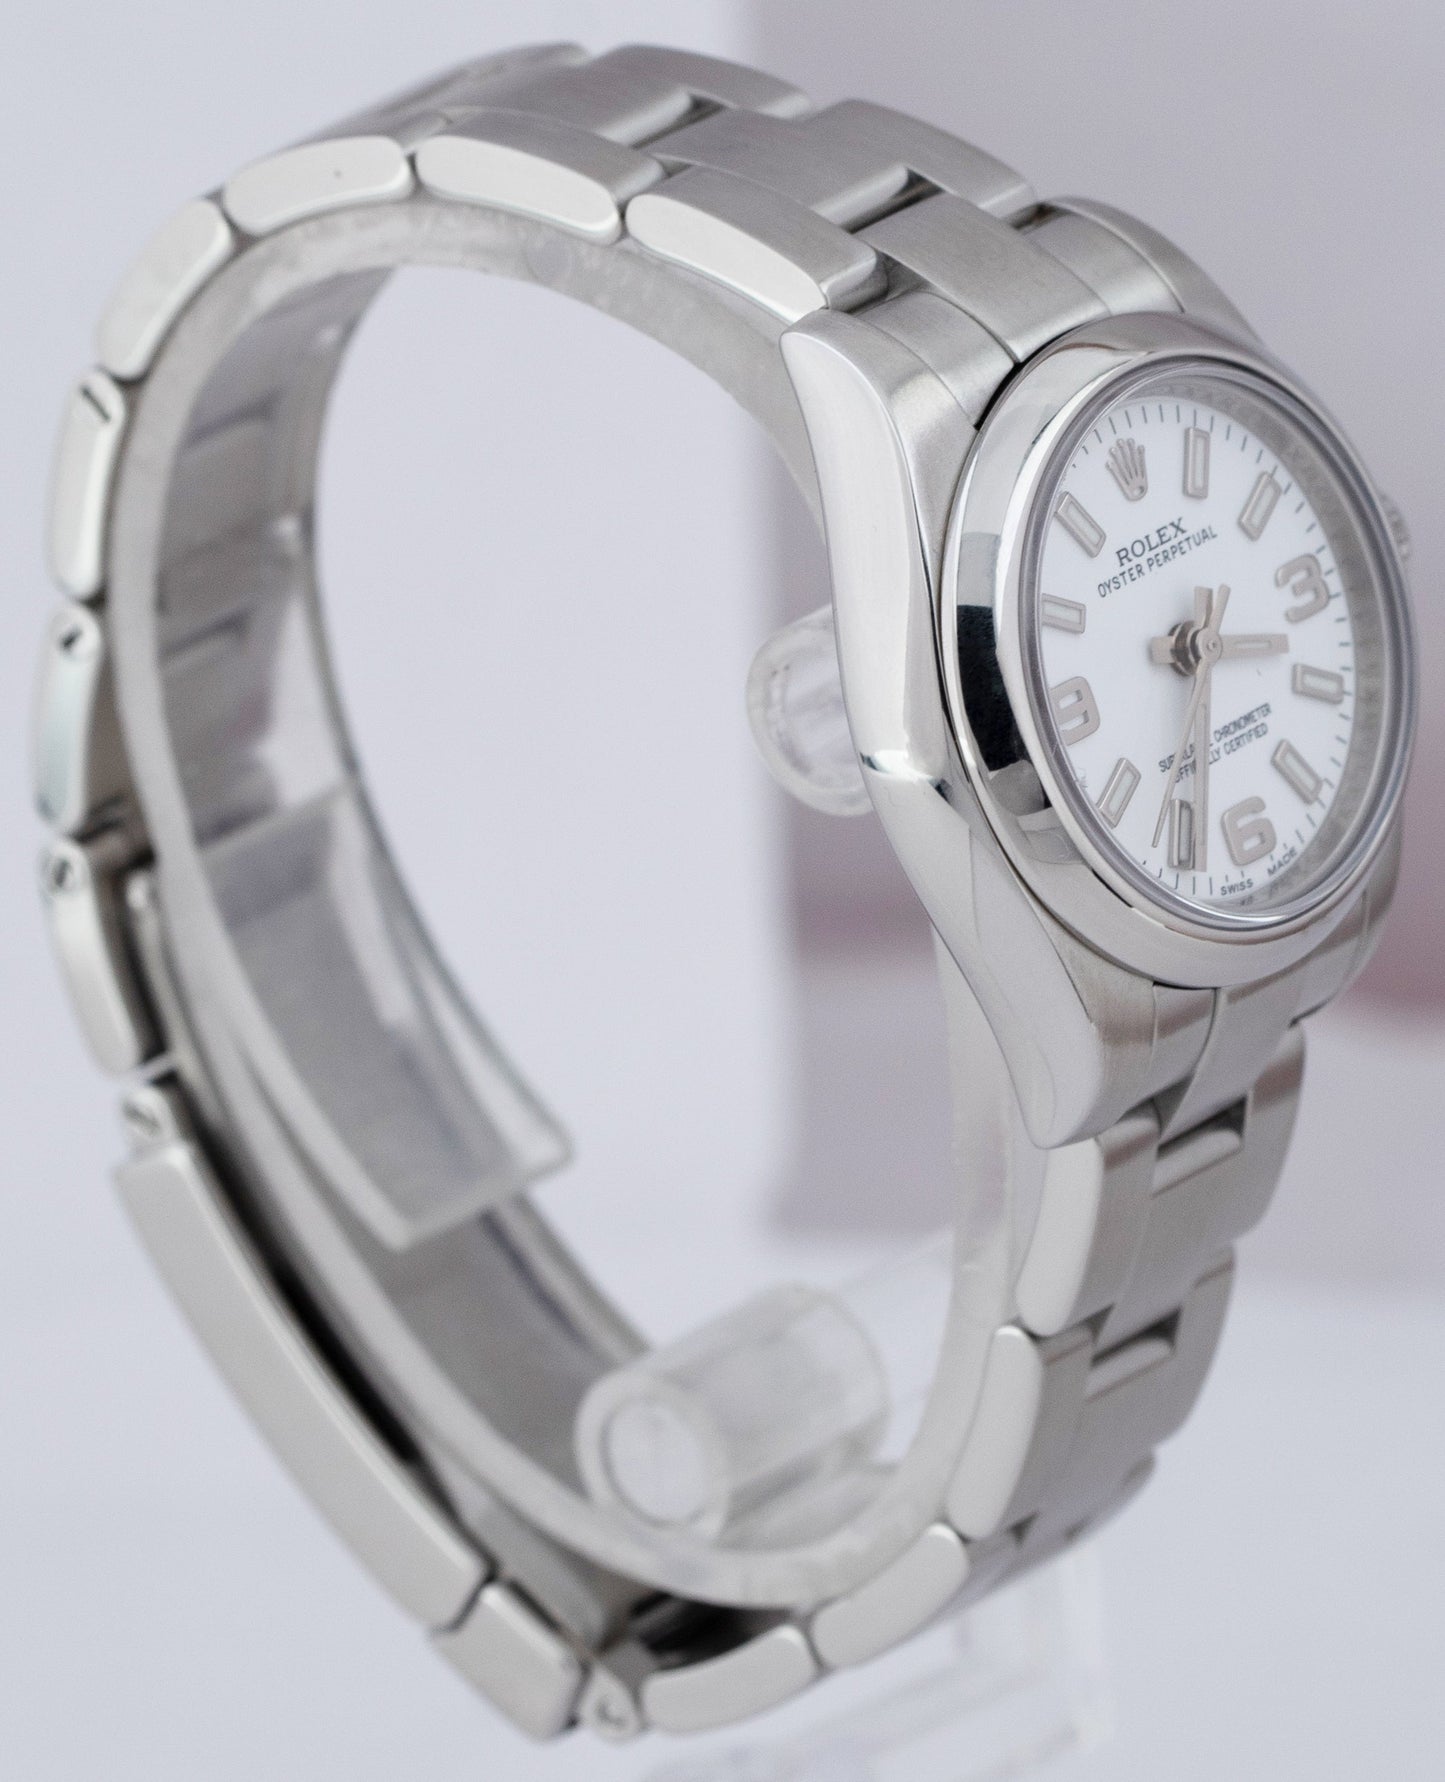 Ladies Rolex Oyster Perpetual 26mm White 3-6-9 Stainless Steel Watch 176200